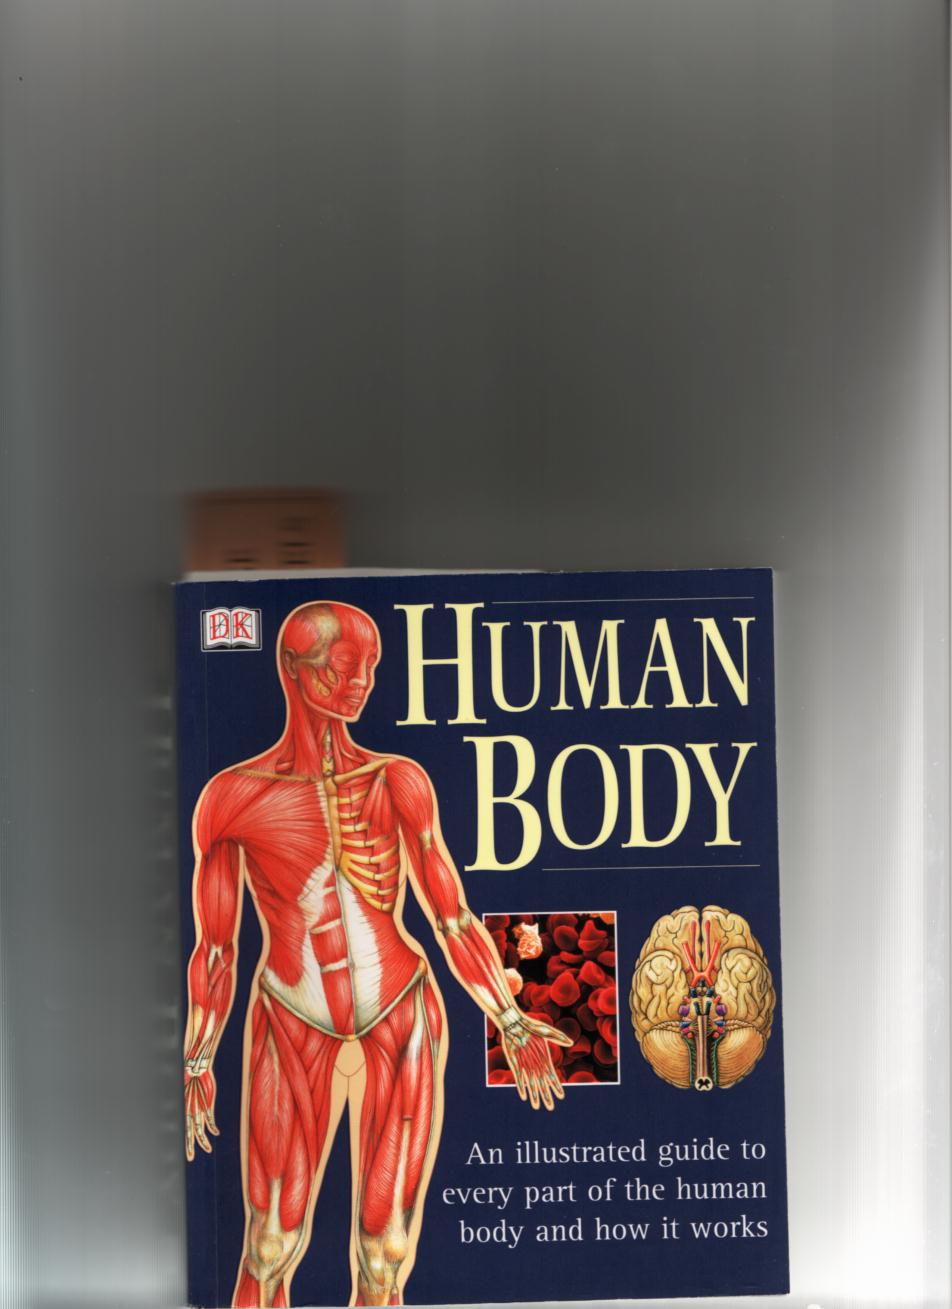 Baggaley's Human Body